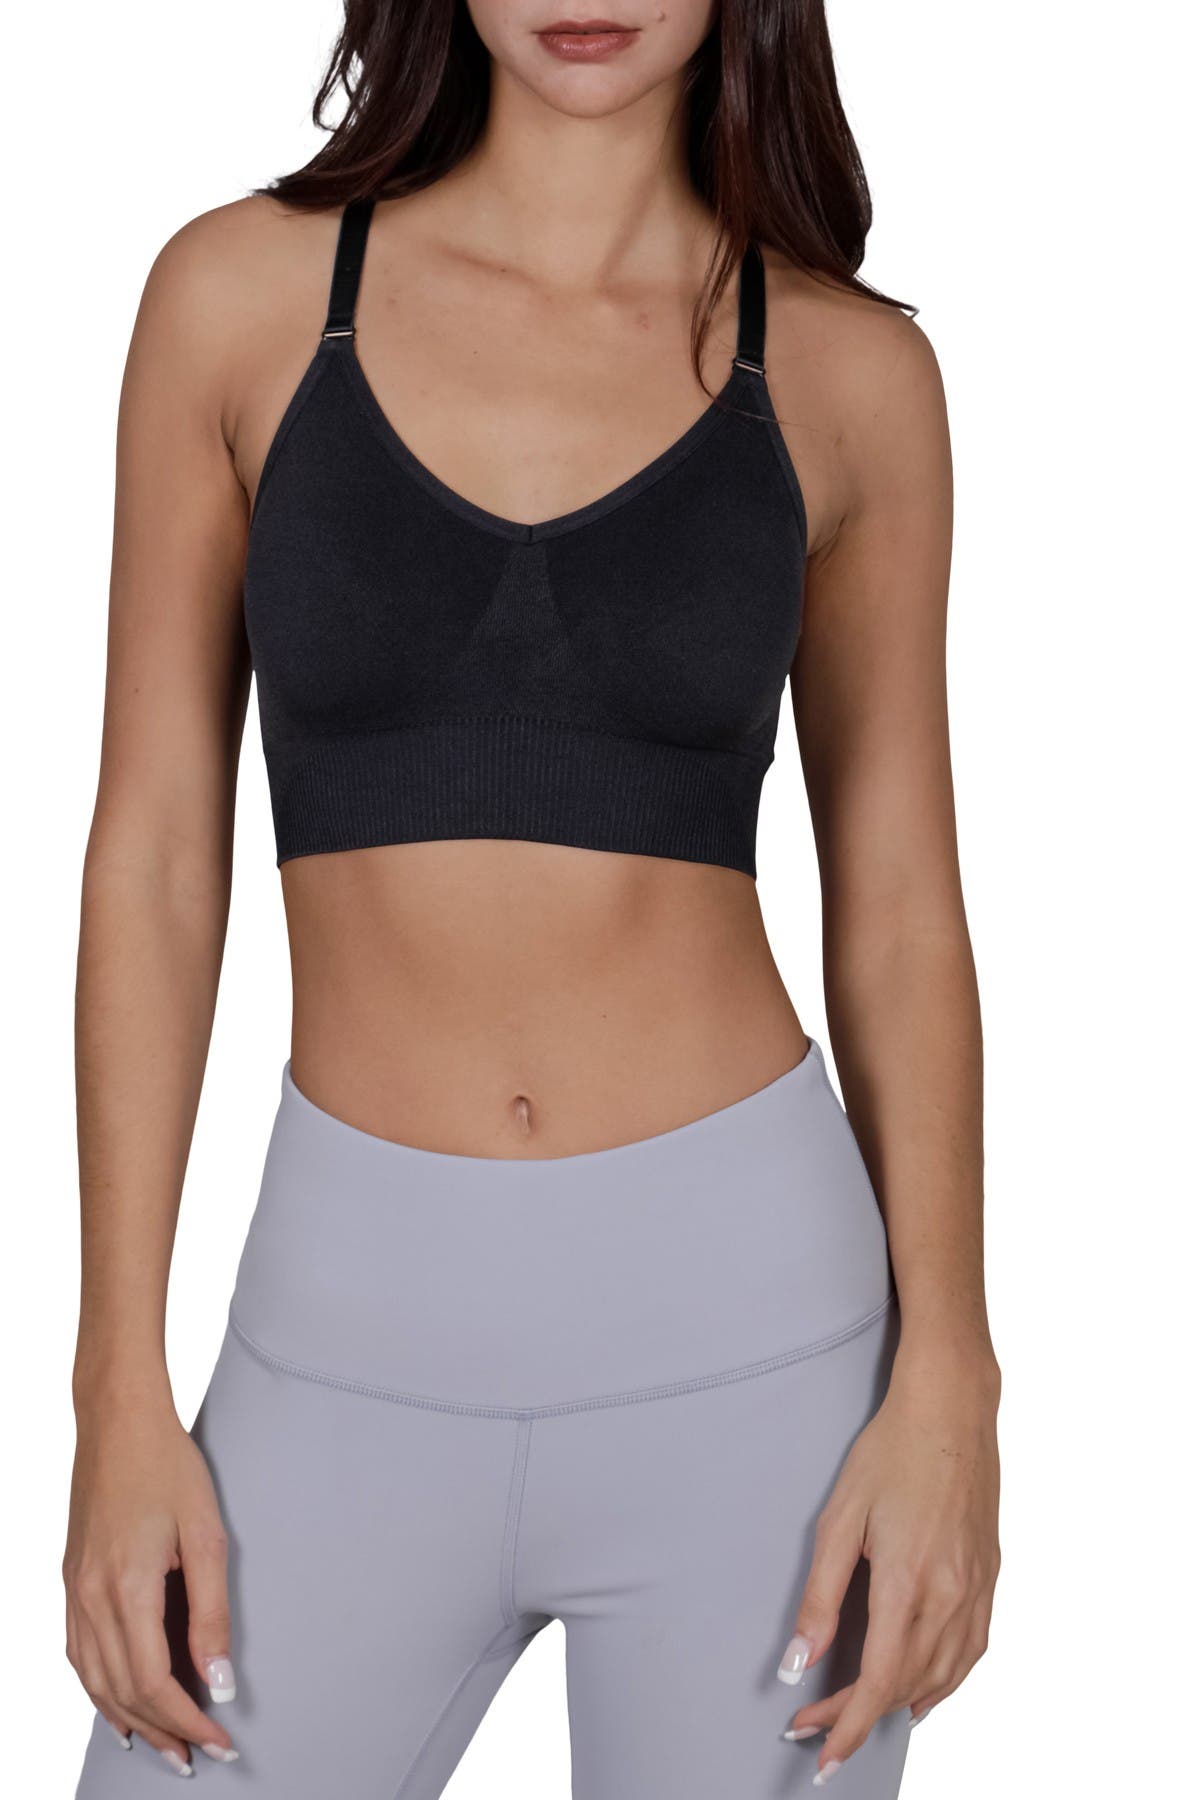 90 Degree By Reflex | Seamless Bra Tops With Adjustable Straps - Pack ...